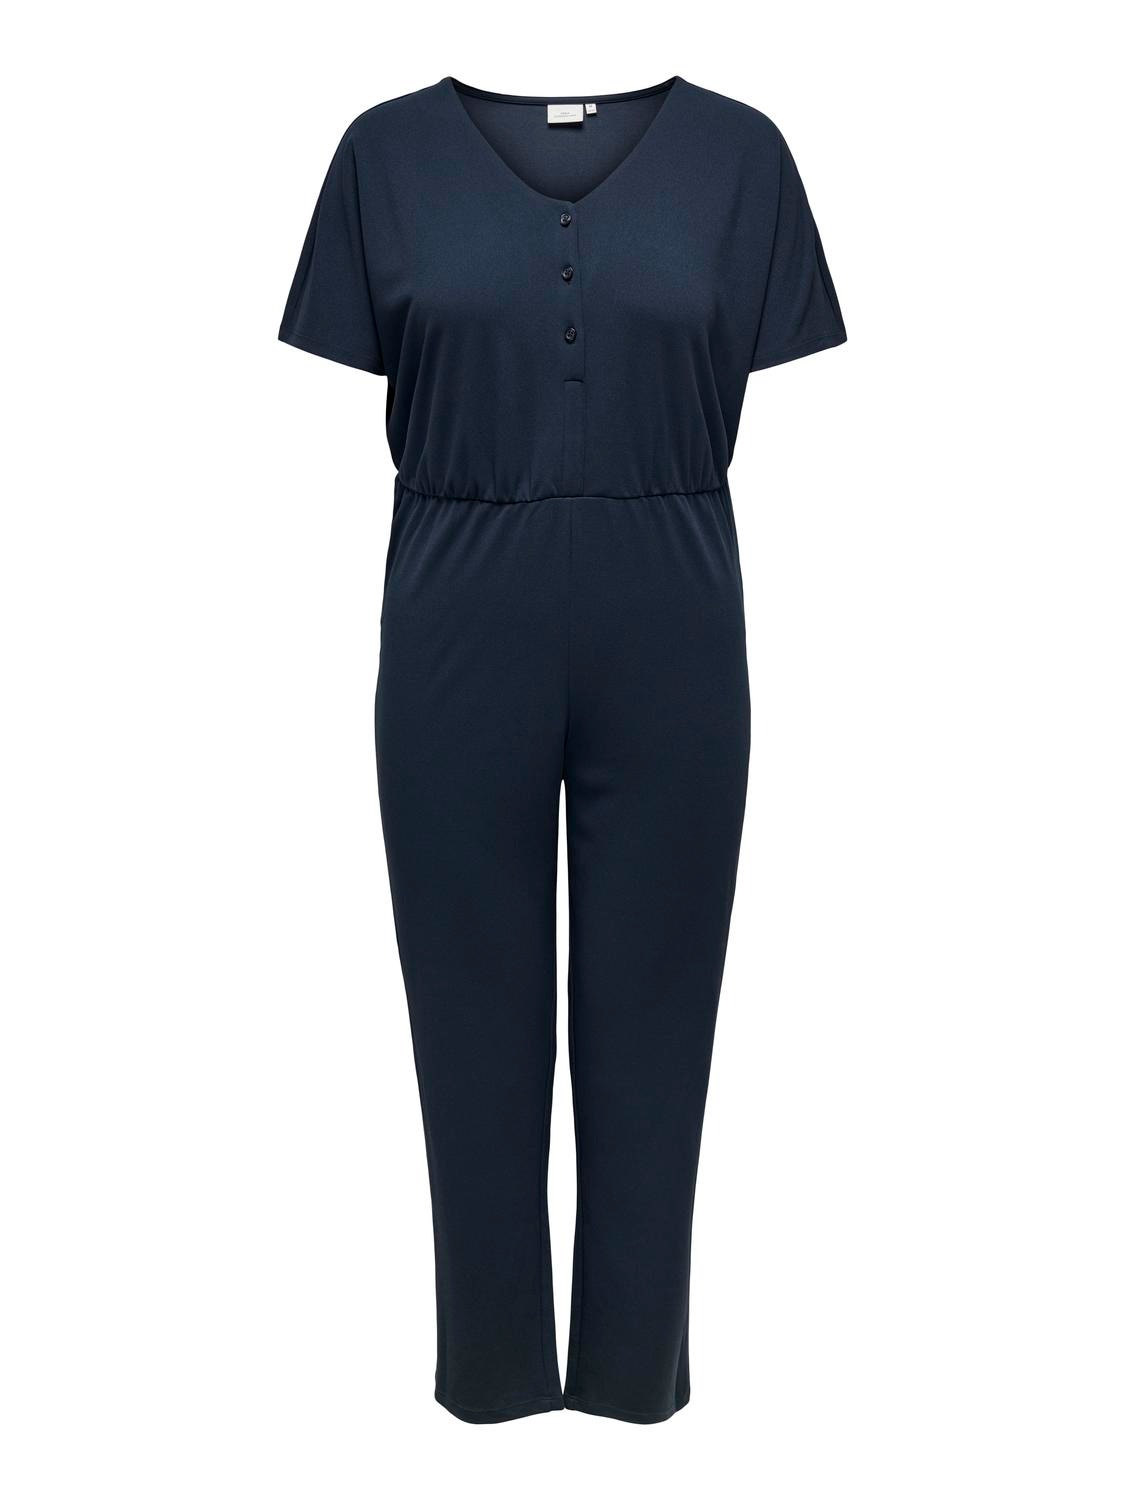 ONLY Curvy solid color jumpsuit -Night Sky - 15290008